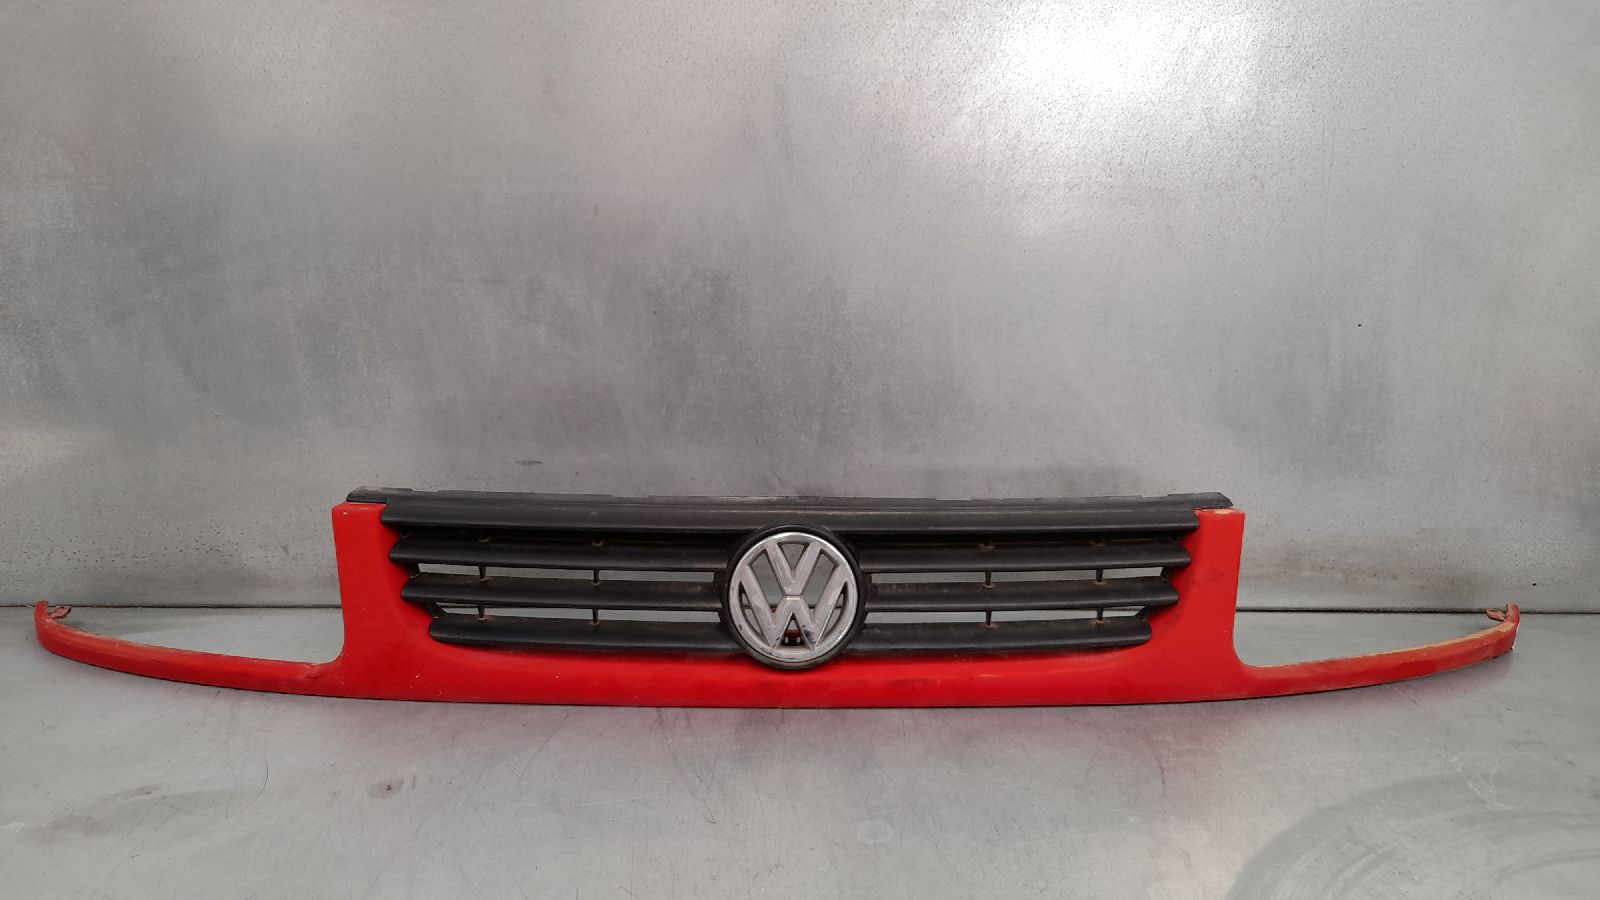 NISSAN Polo 3 generation (1994-2002) Radiator Grille 6N0853661C 22049683